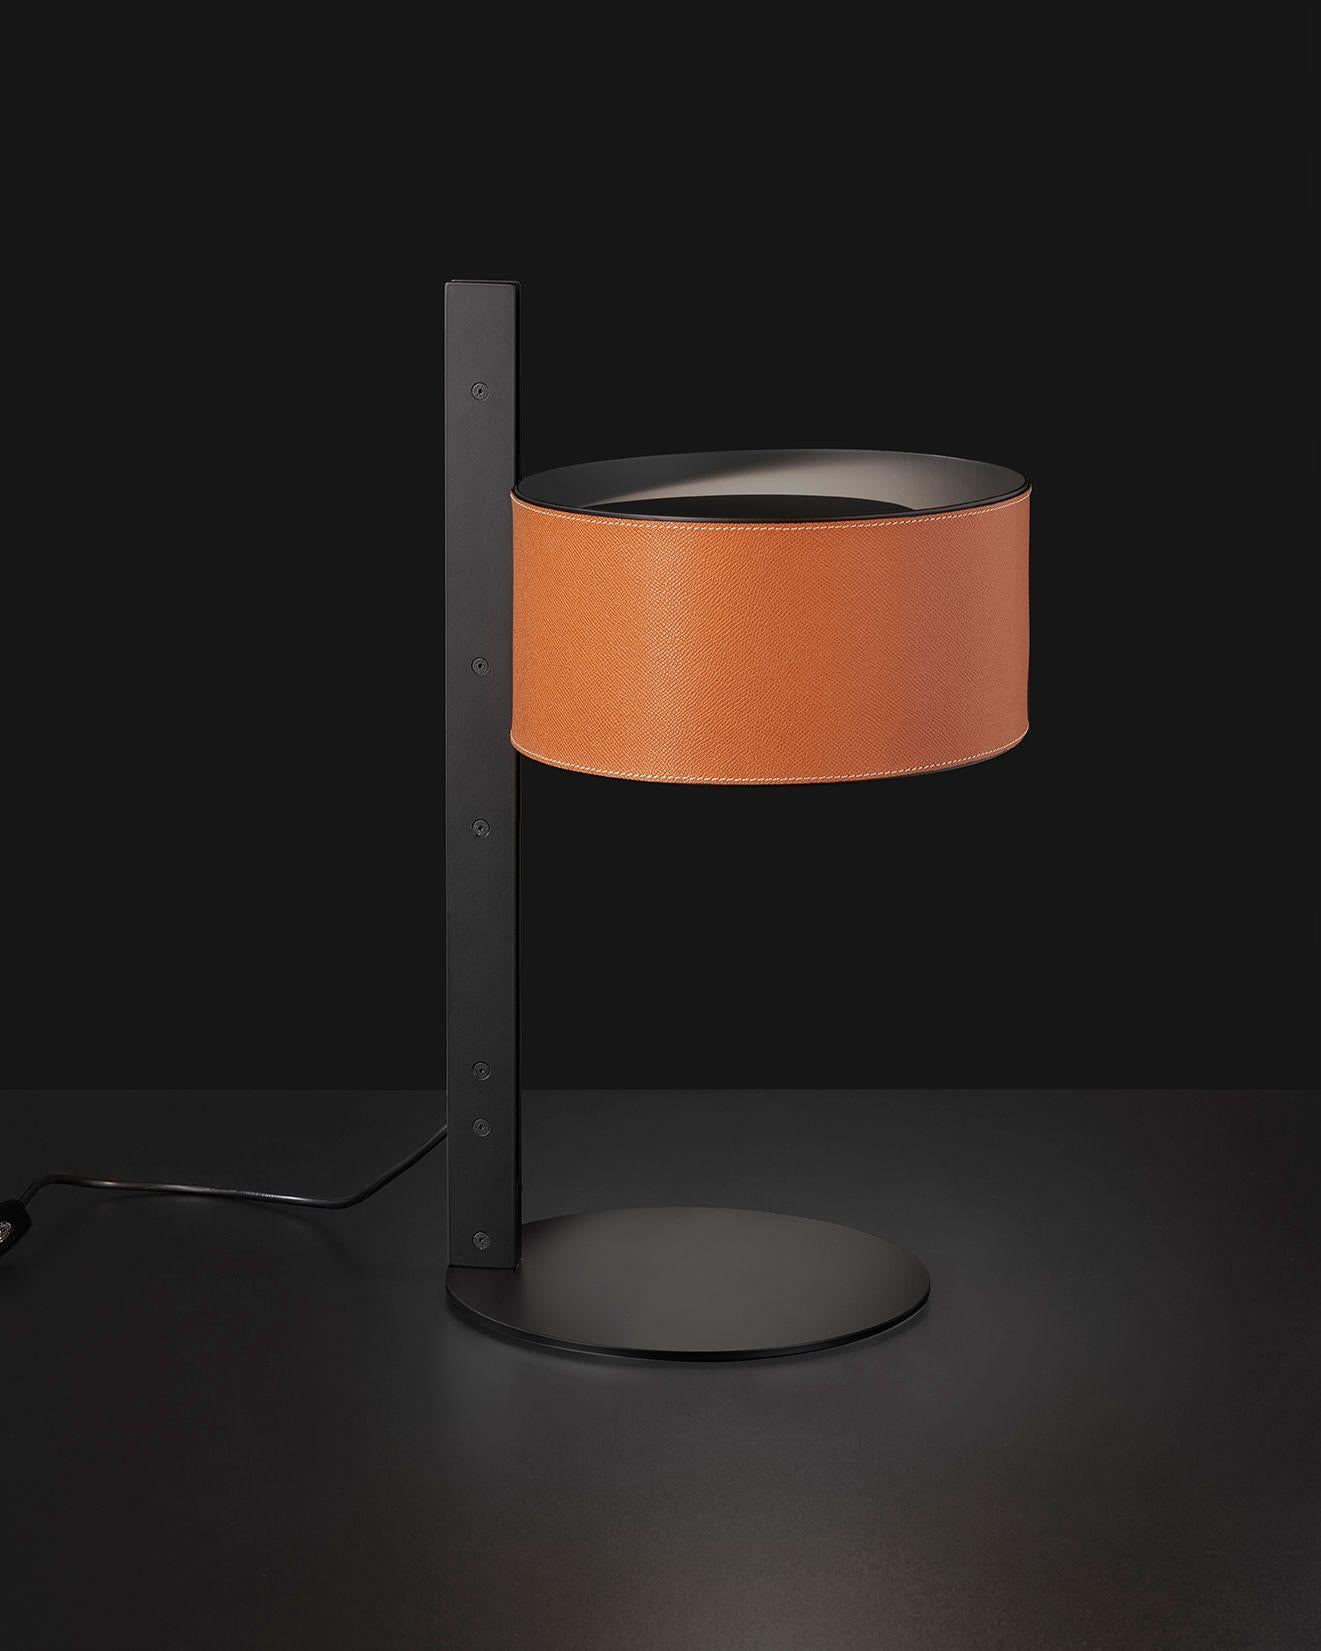 Table Lamp model Parallel designed by Victor Vasilev in 2022.
Table lamp in metal giving direct light. Base, stem and closing disk in lacquered matt black, reflector covered with leather. With universal dimmer.
Manufactured by Oluce,